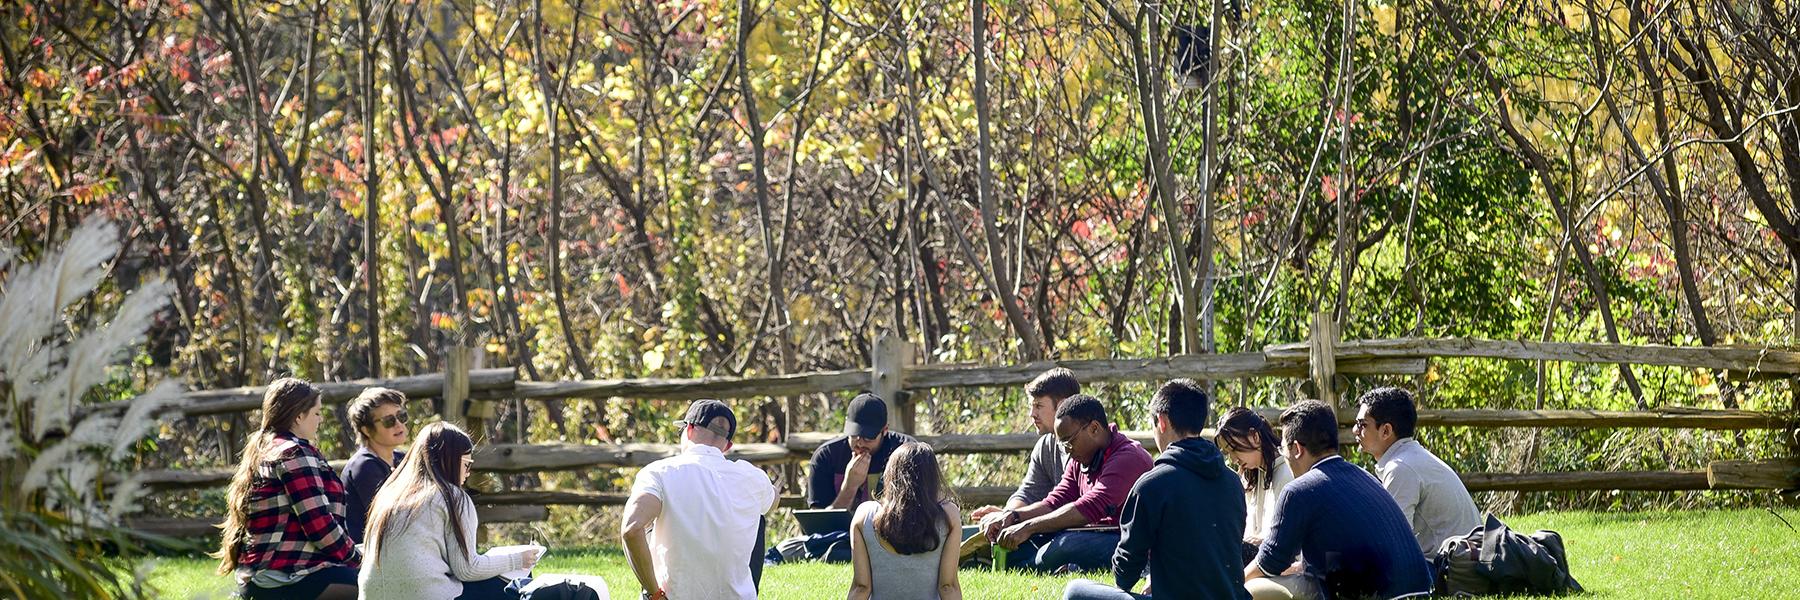 students sitting in a circle in the grass